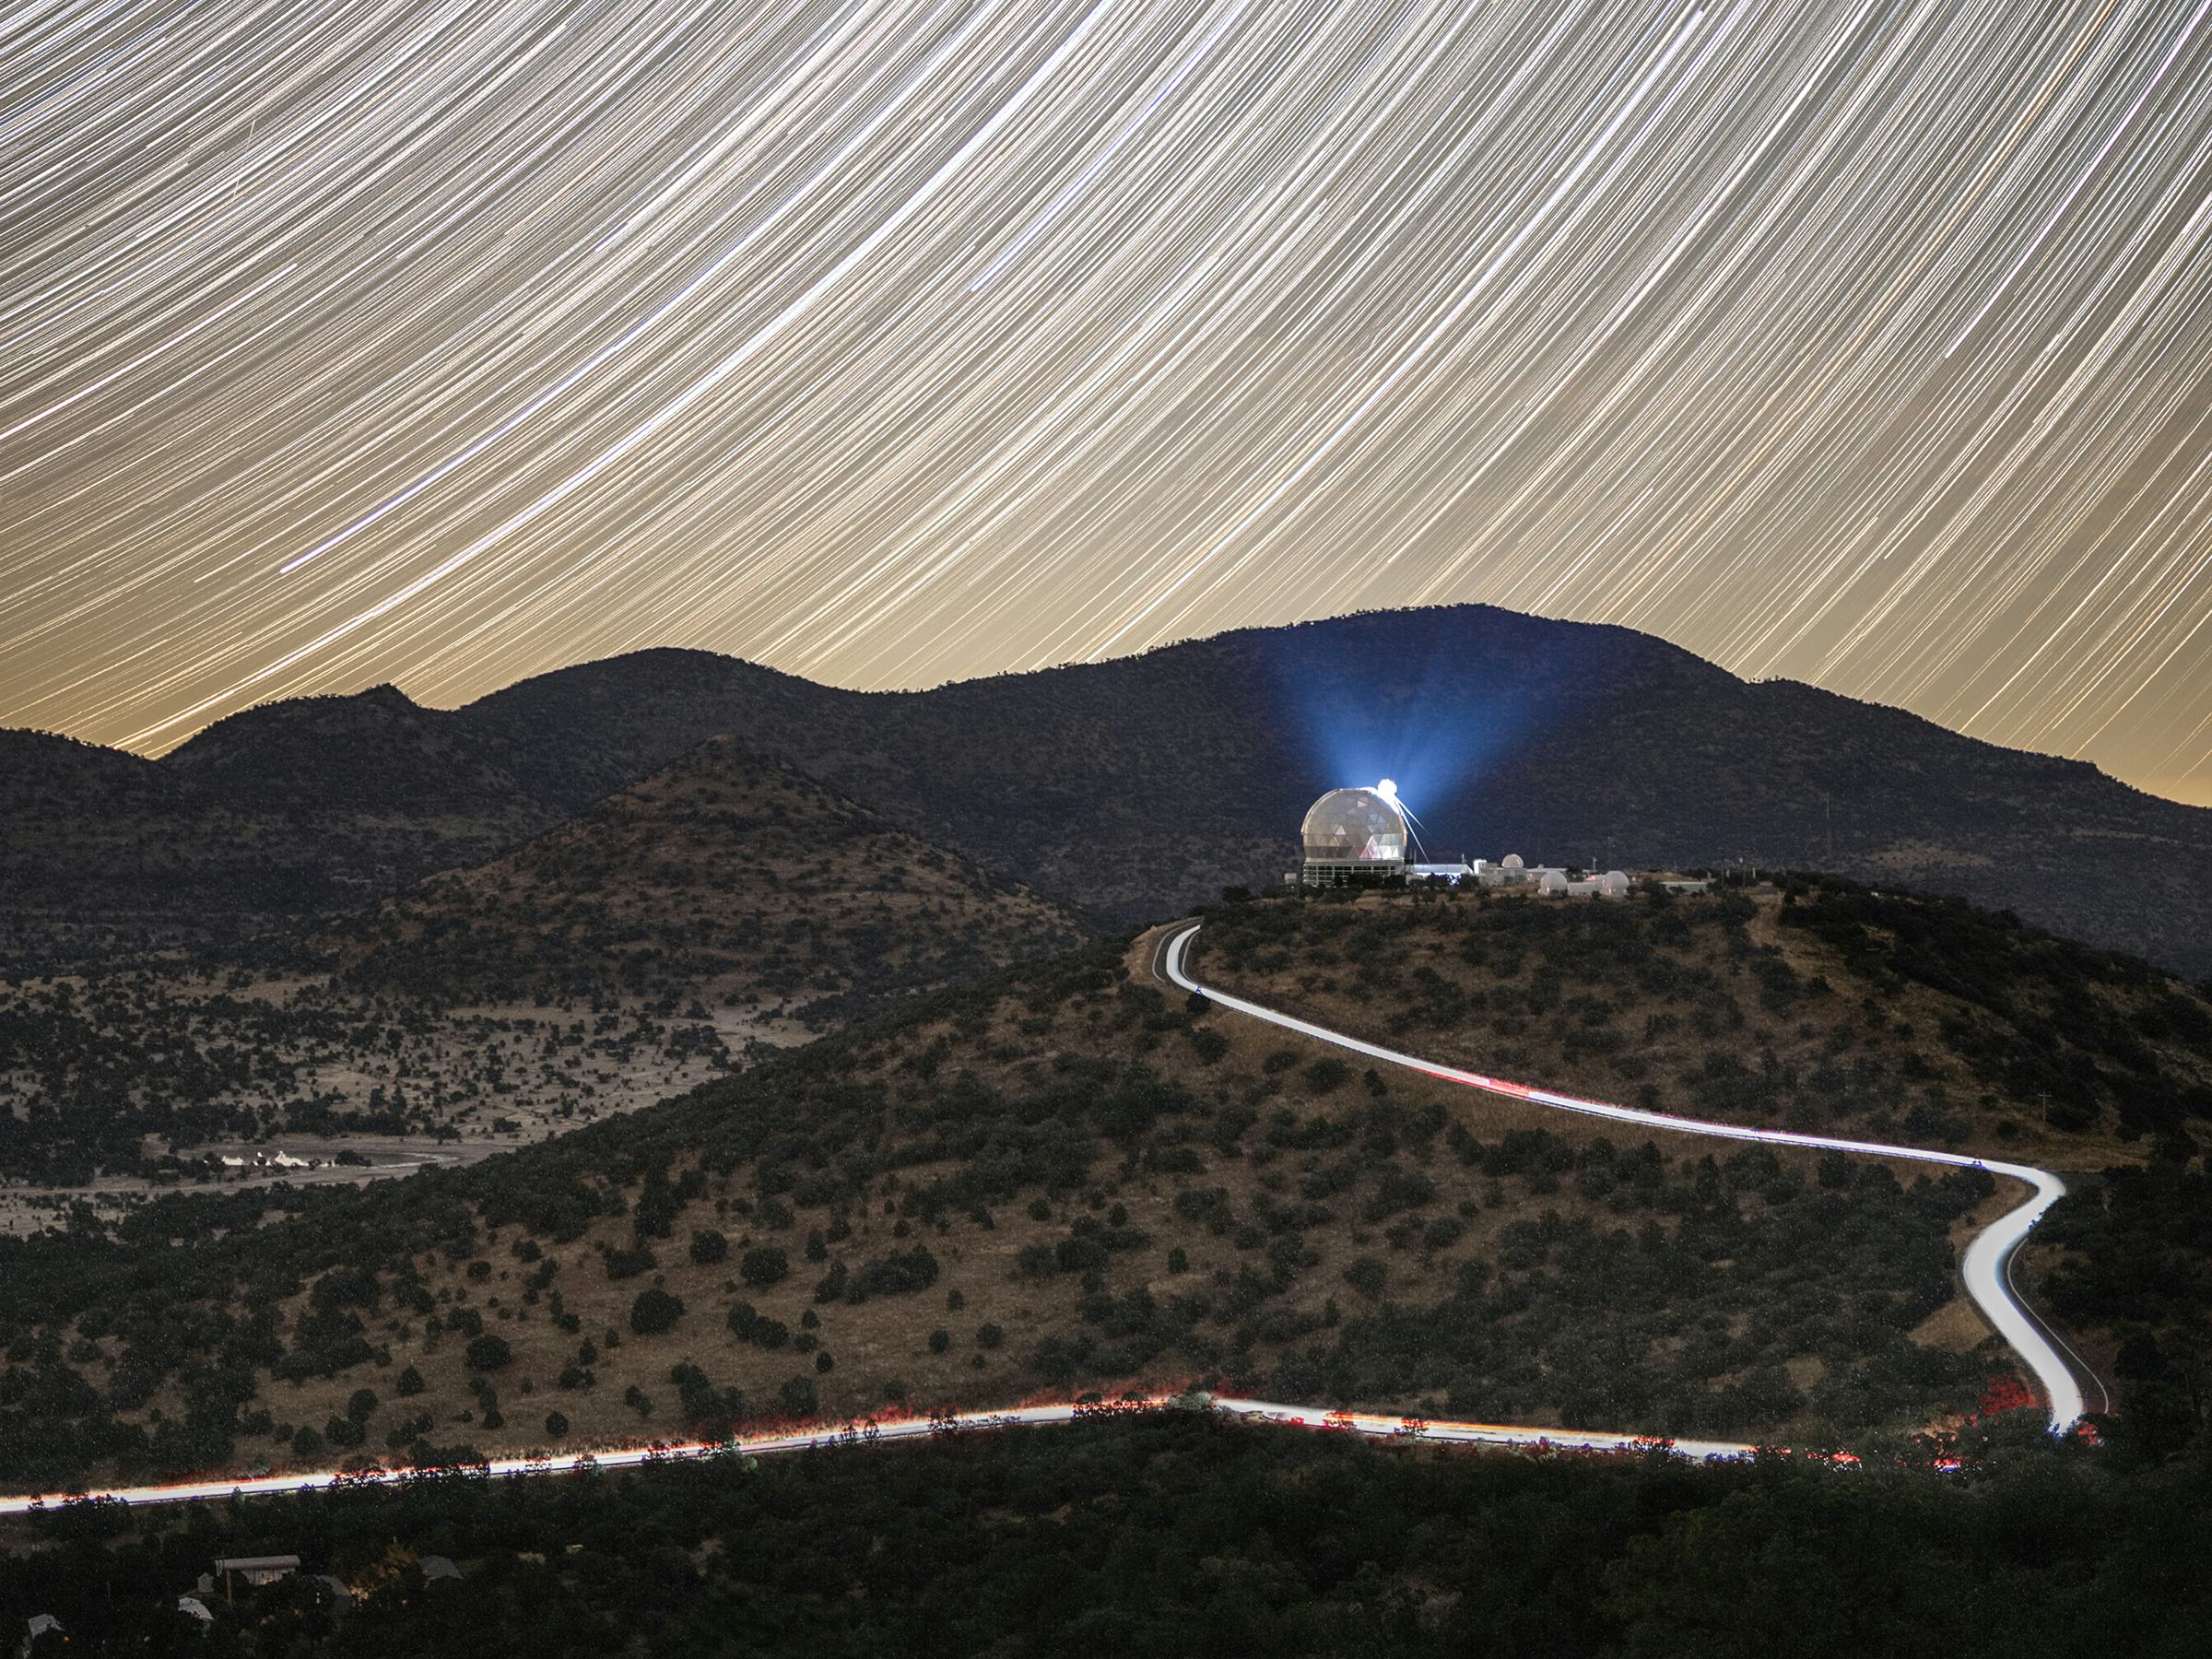 Time-lapse photo of the Hobby-Eberly Telescope in West Texas with star trails in the sky.